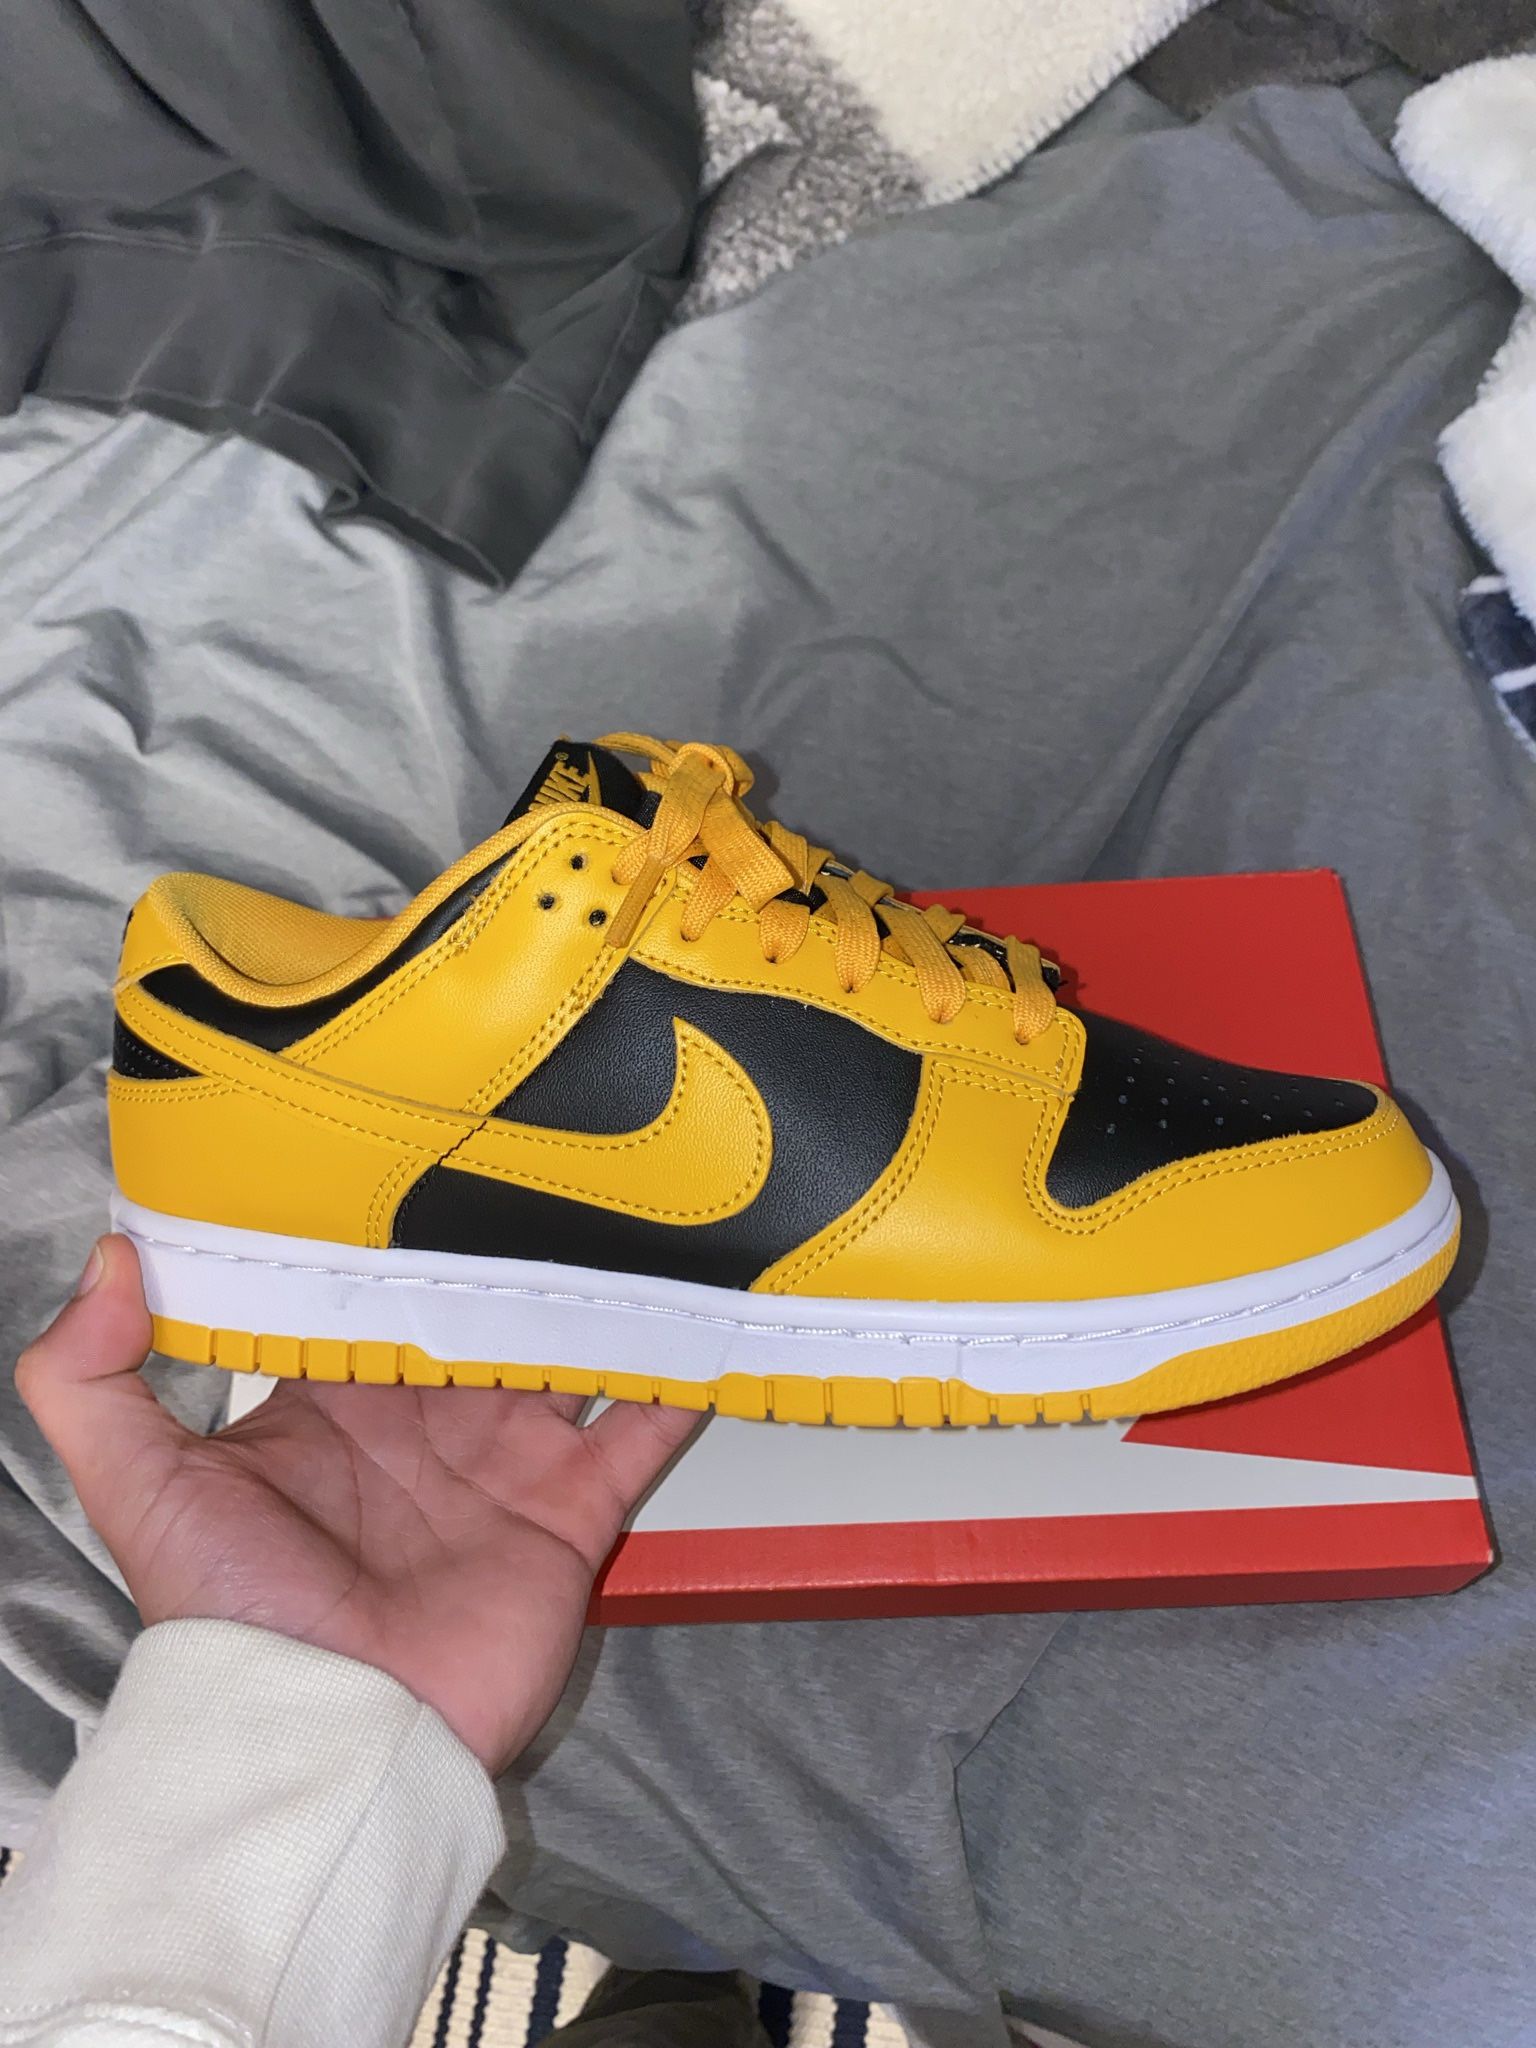 Nike SB Dunk Low Championship Goldenrod Black Yellow Size 8 Sneaker Shoe for Sale in Los Banos, CA - OfferUp